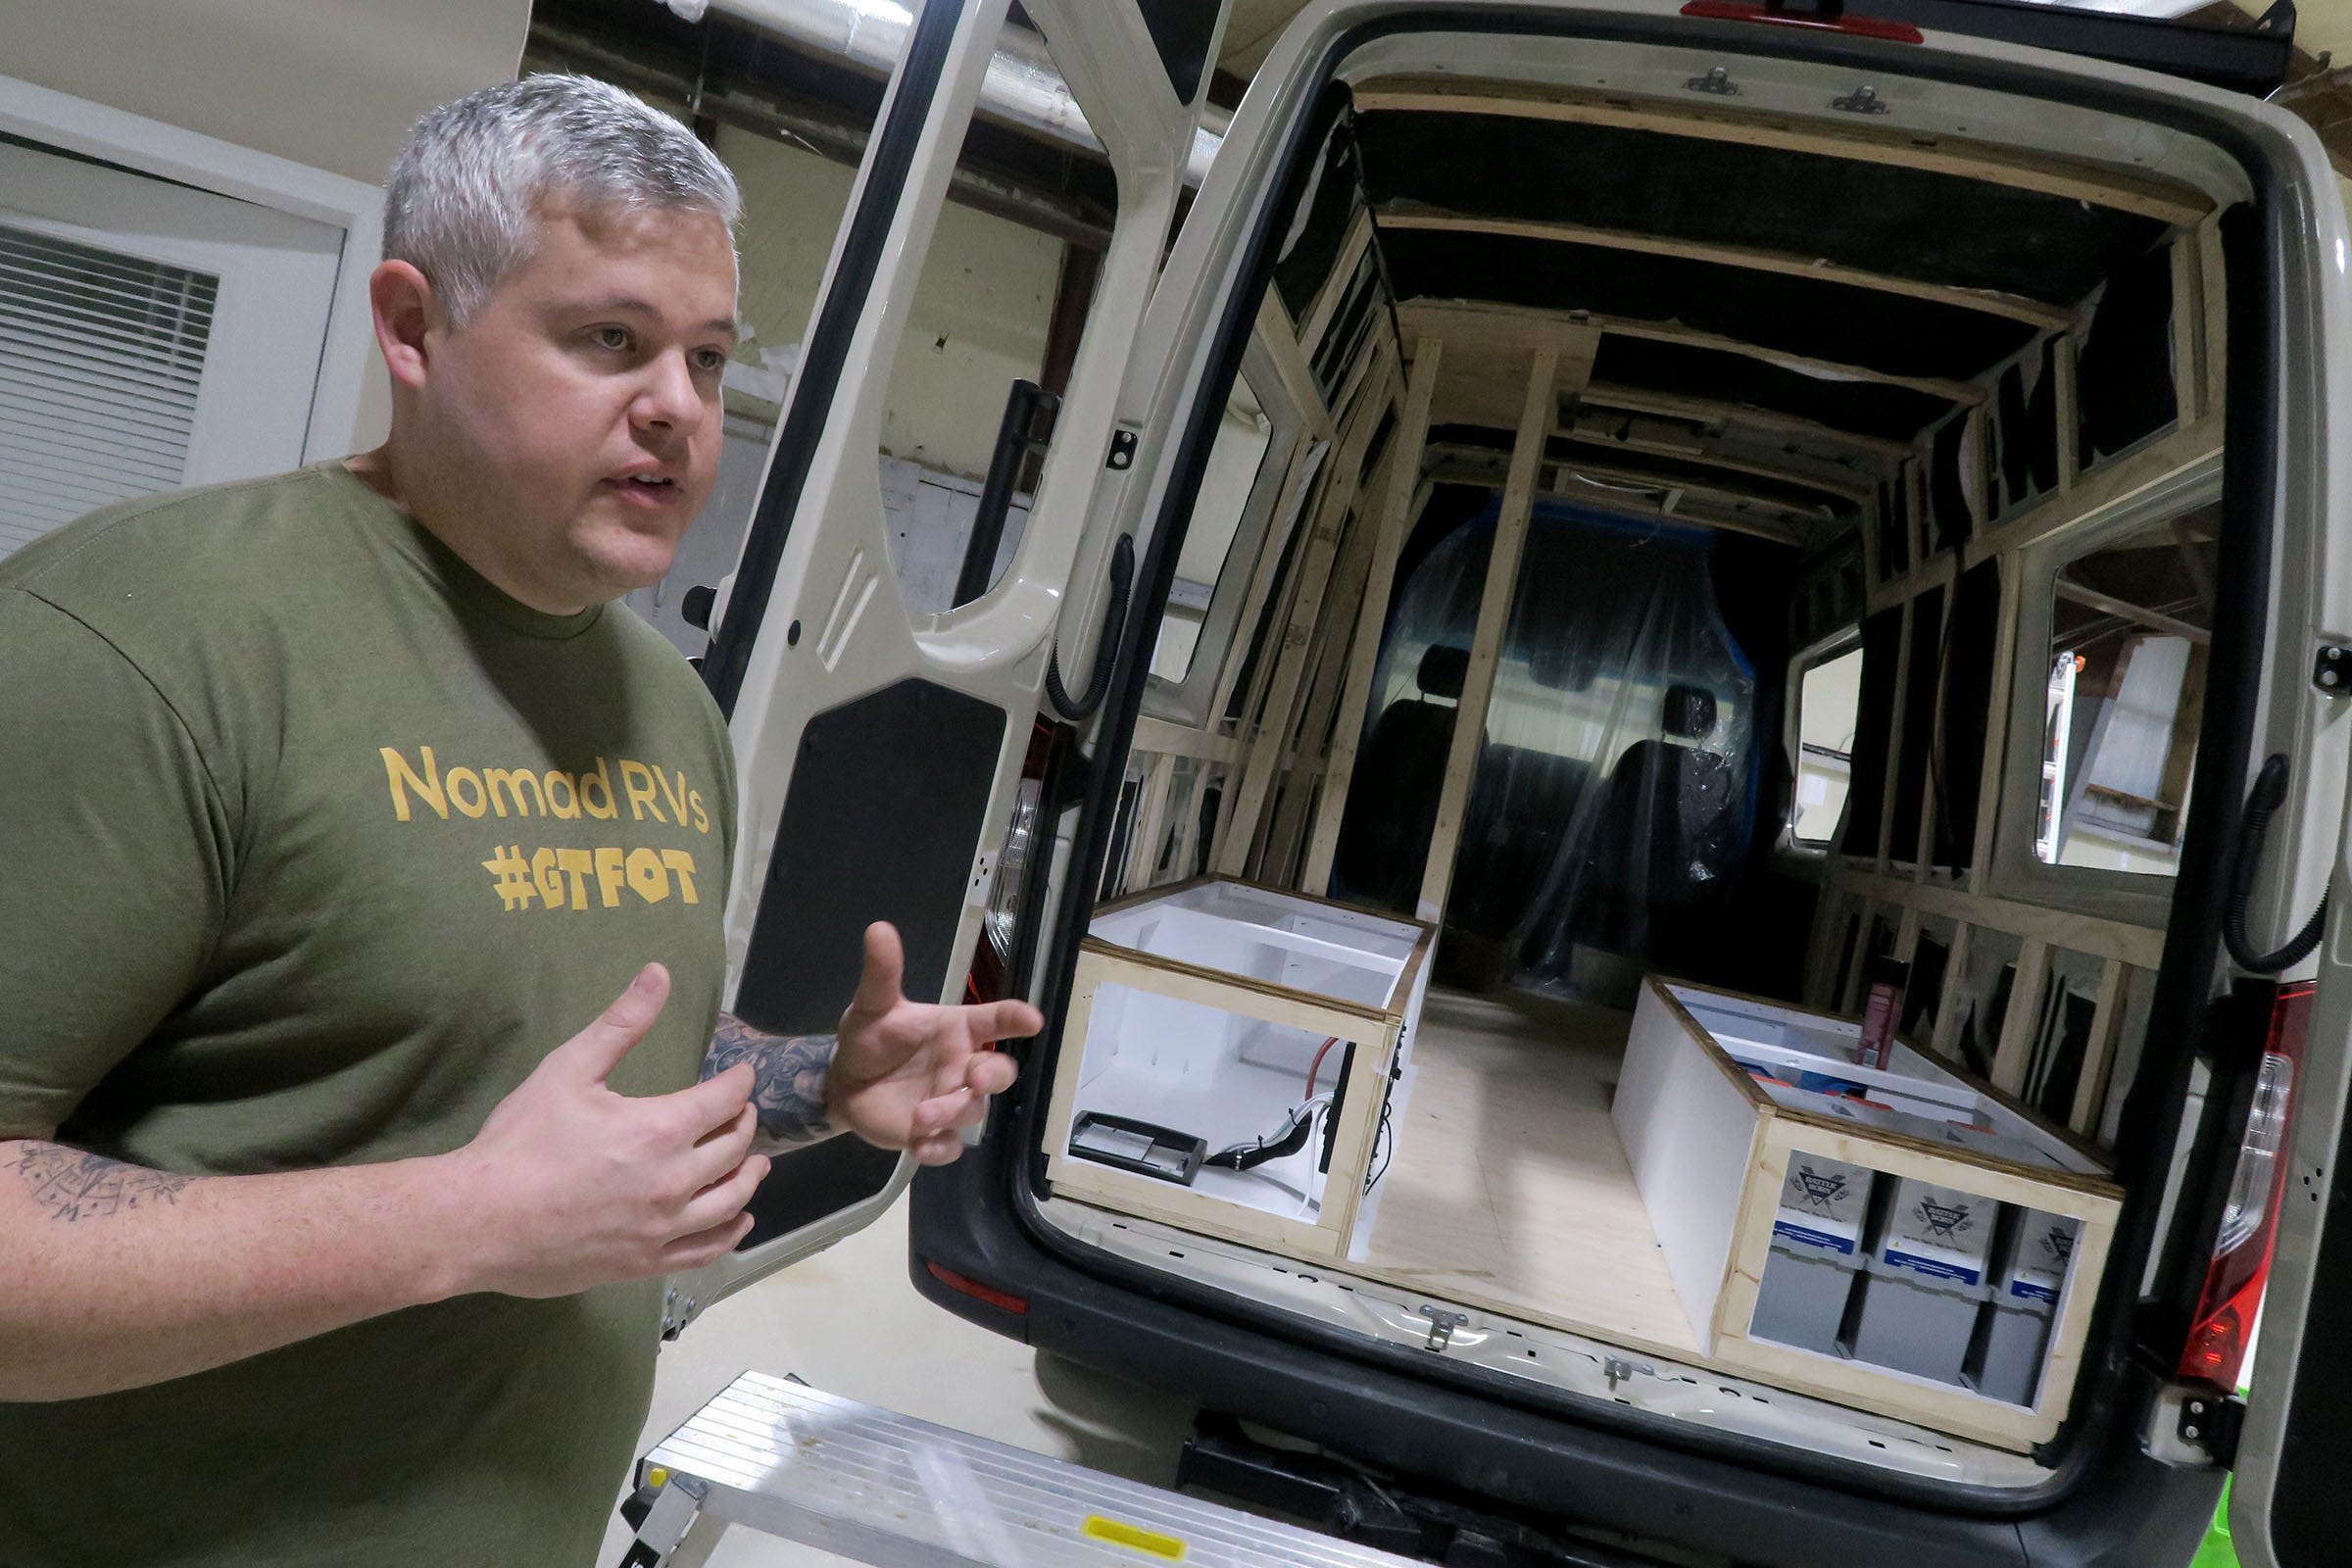 Home prices too high? Nomad RVs in Toms River grows by helping van buyers live on the road